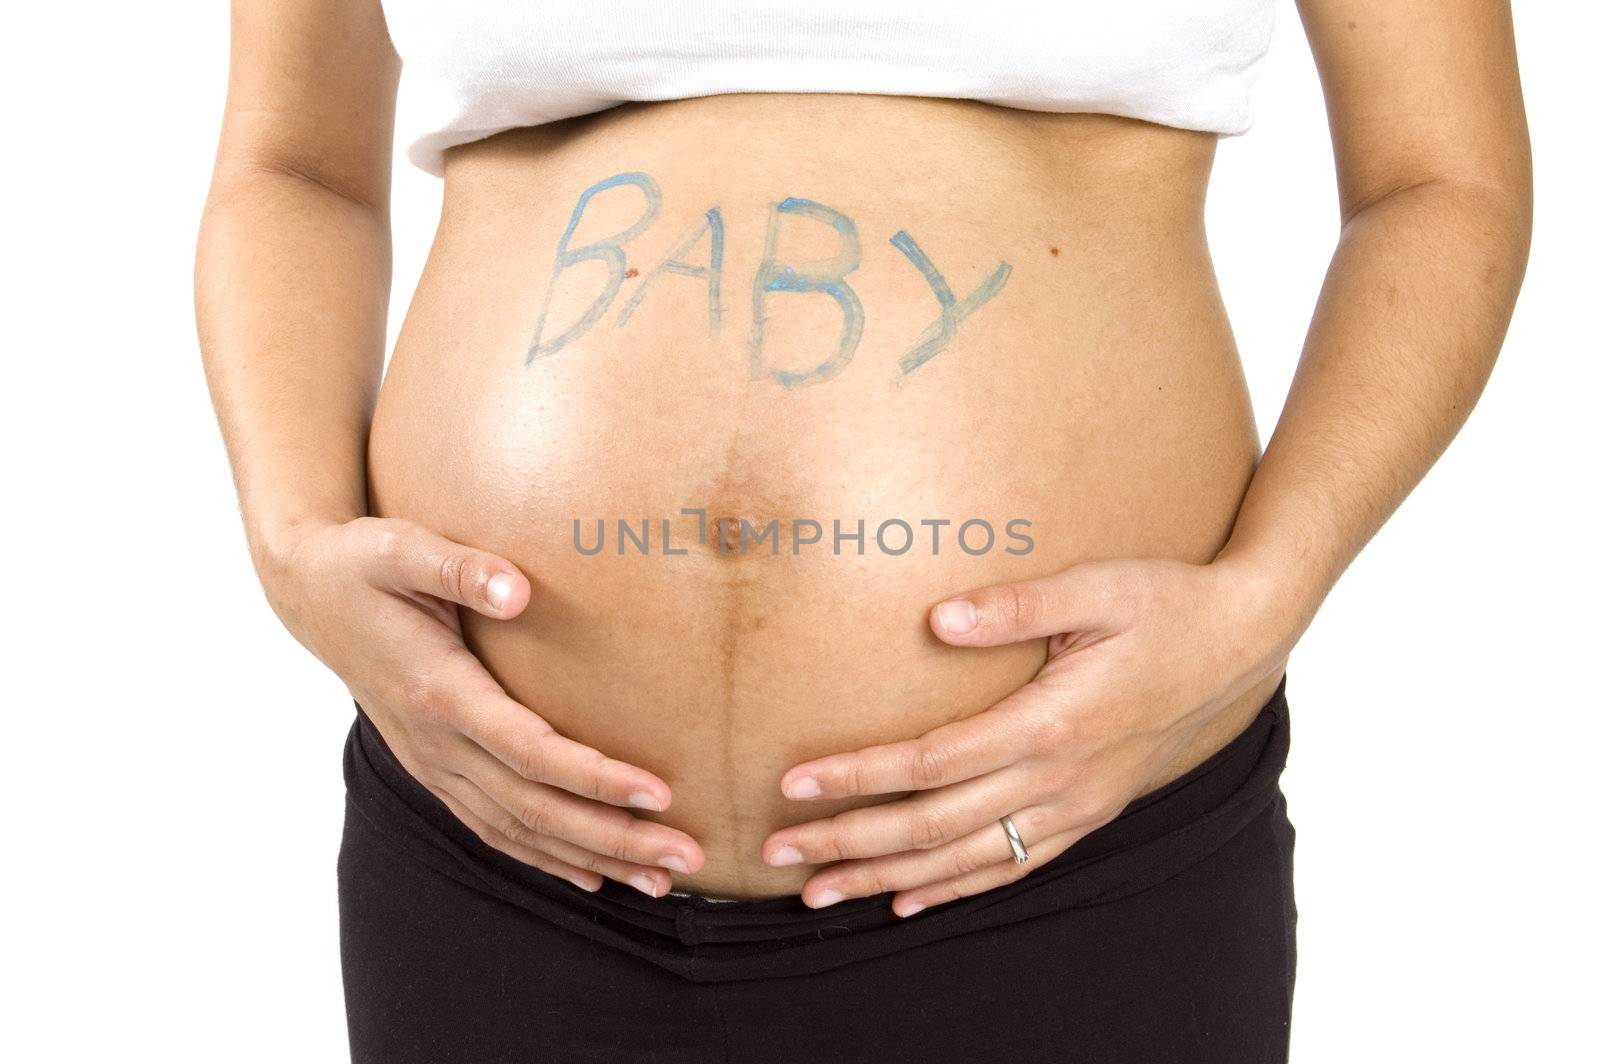 30 weeks pregnant teenager holding her belly with the word baby